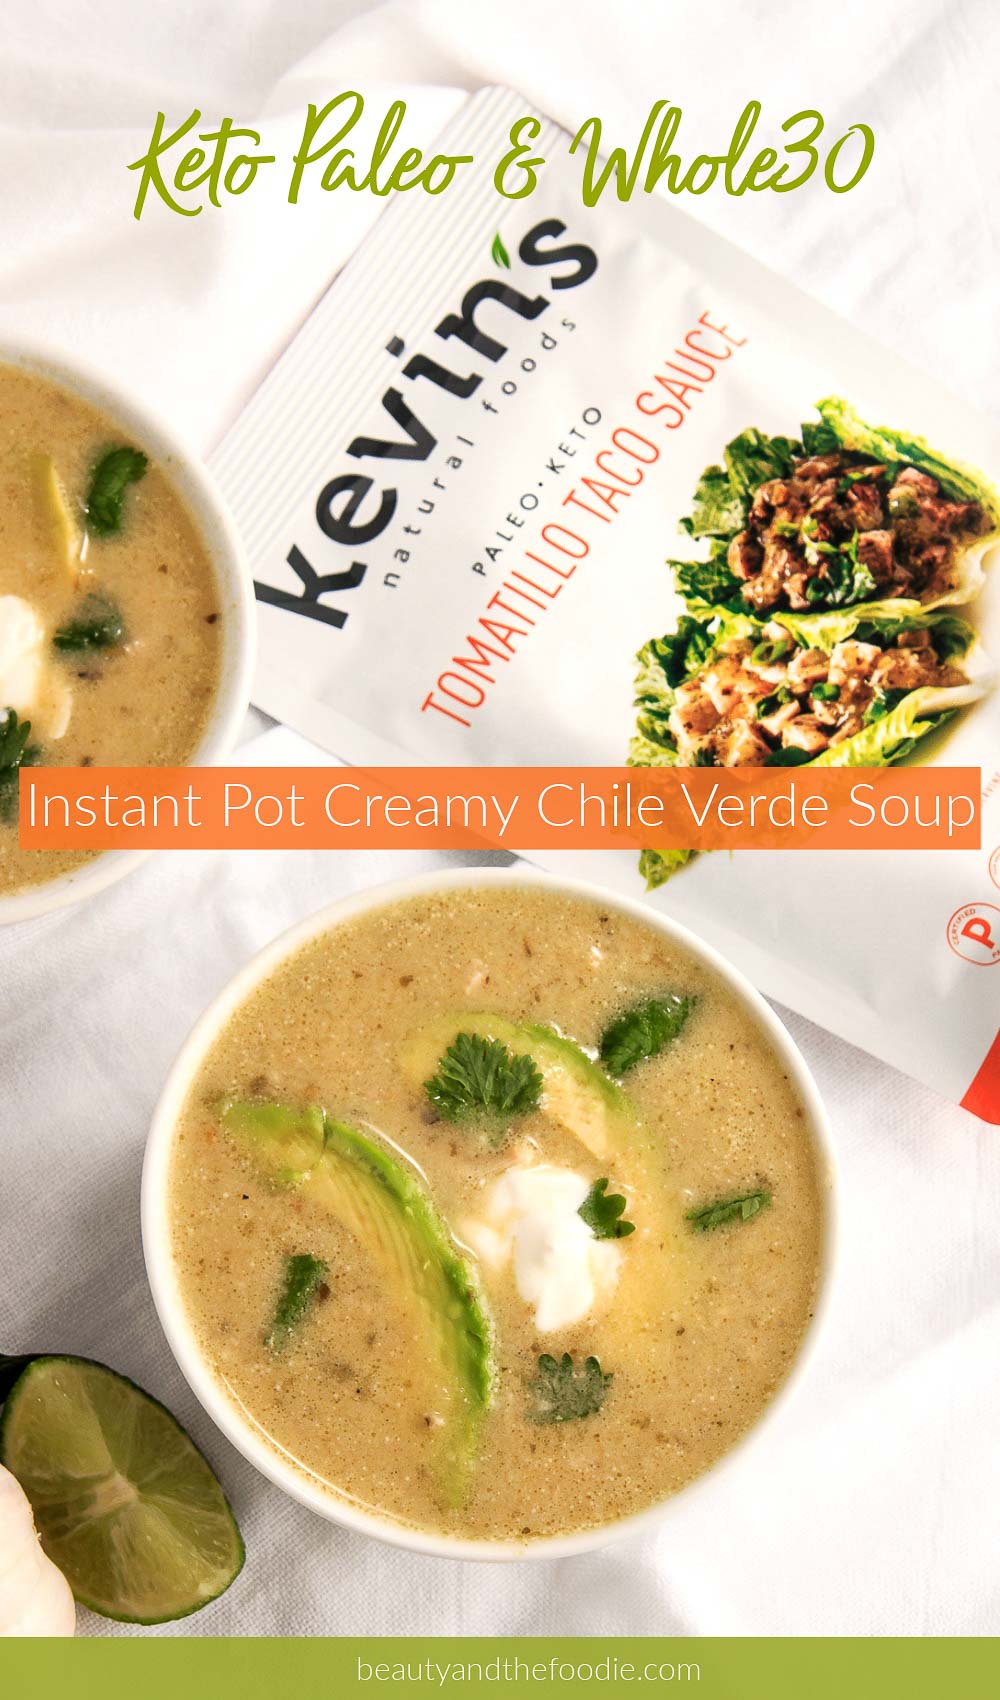 a creamy chile verde soup made in the Instant Pot.